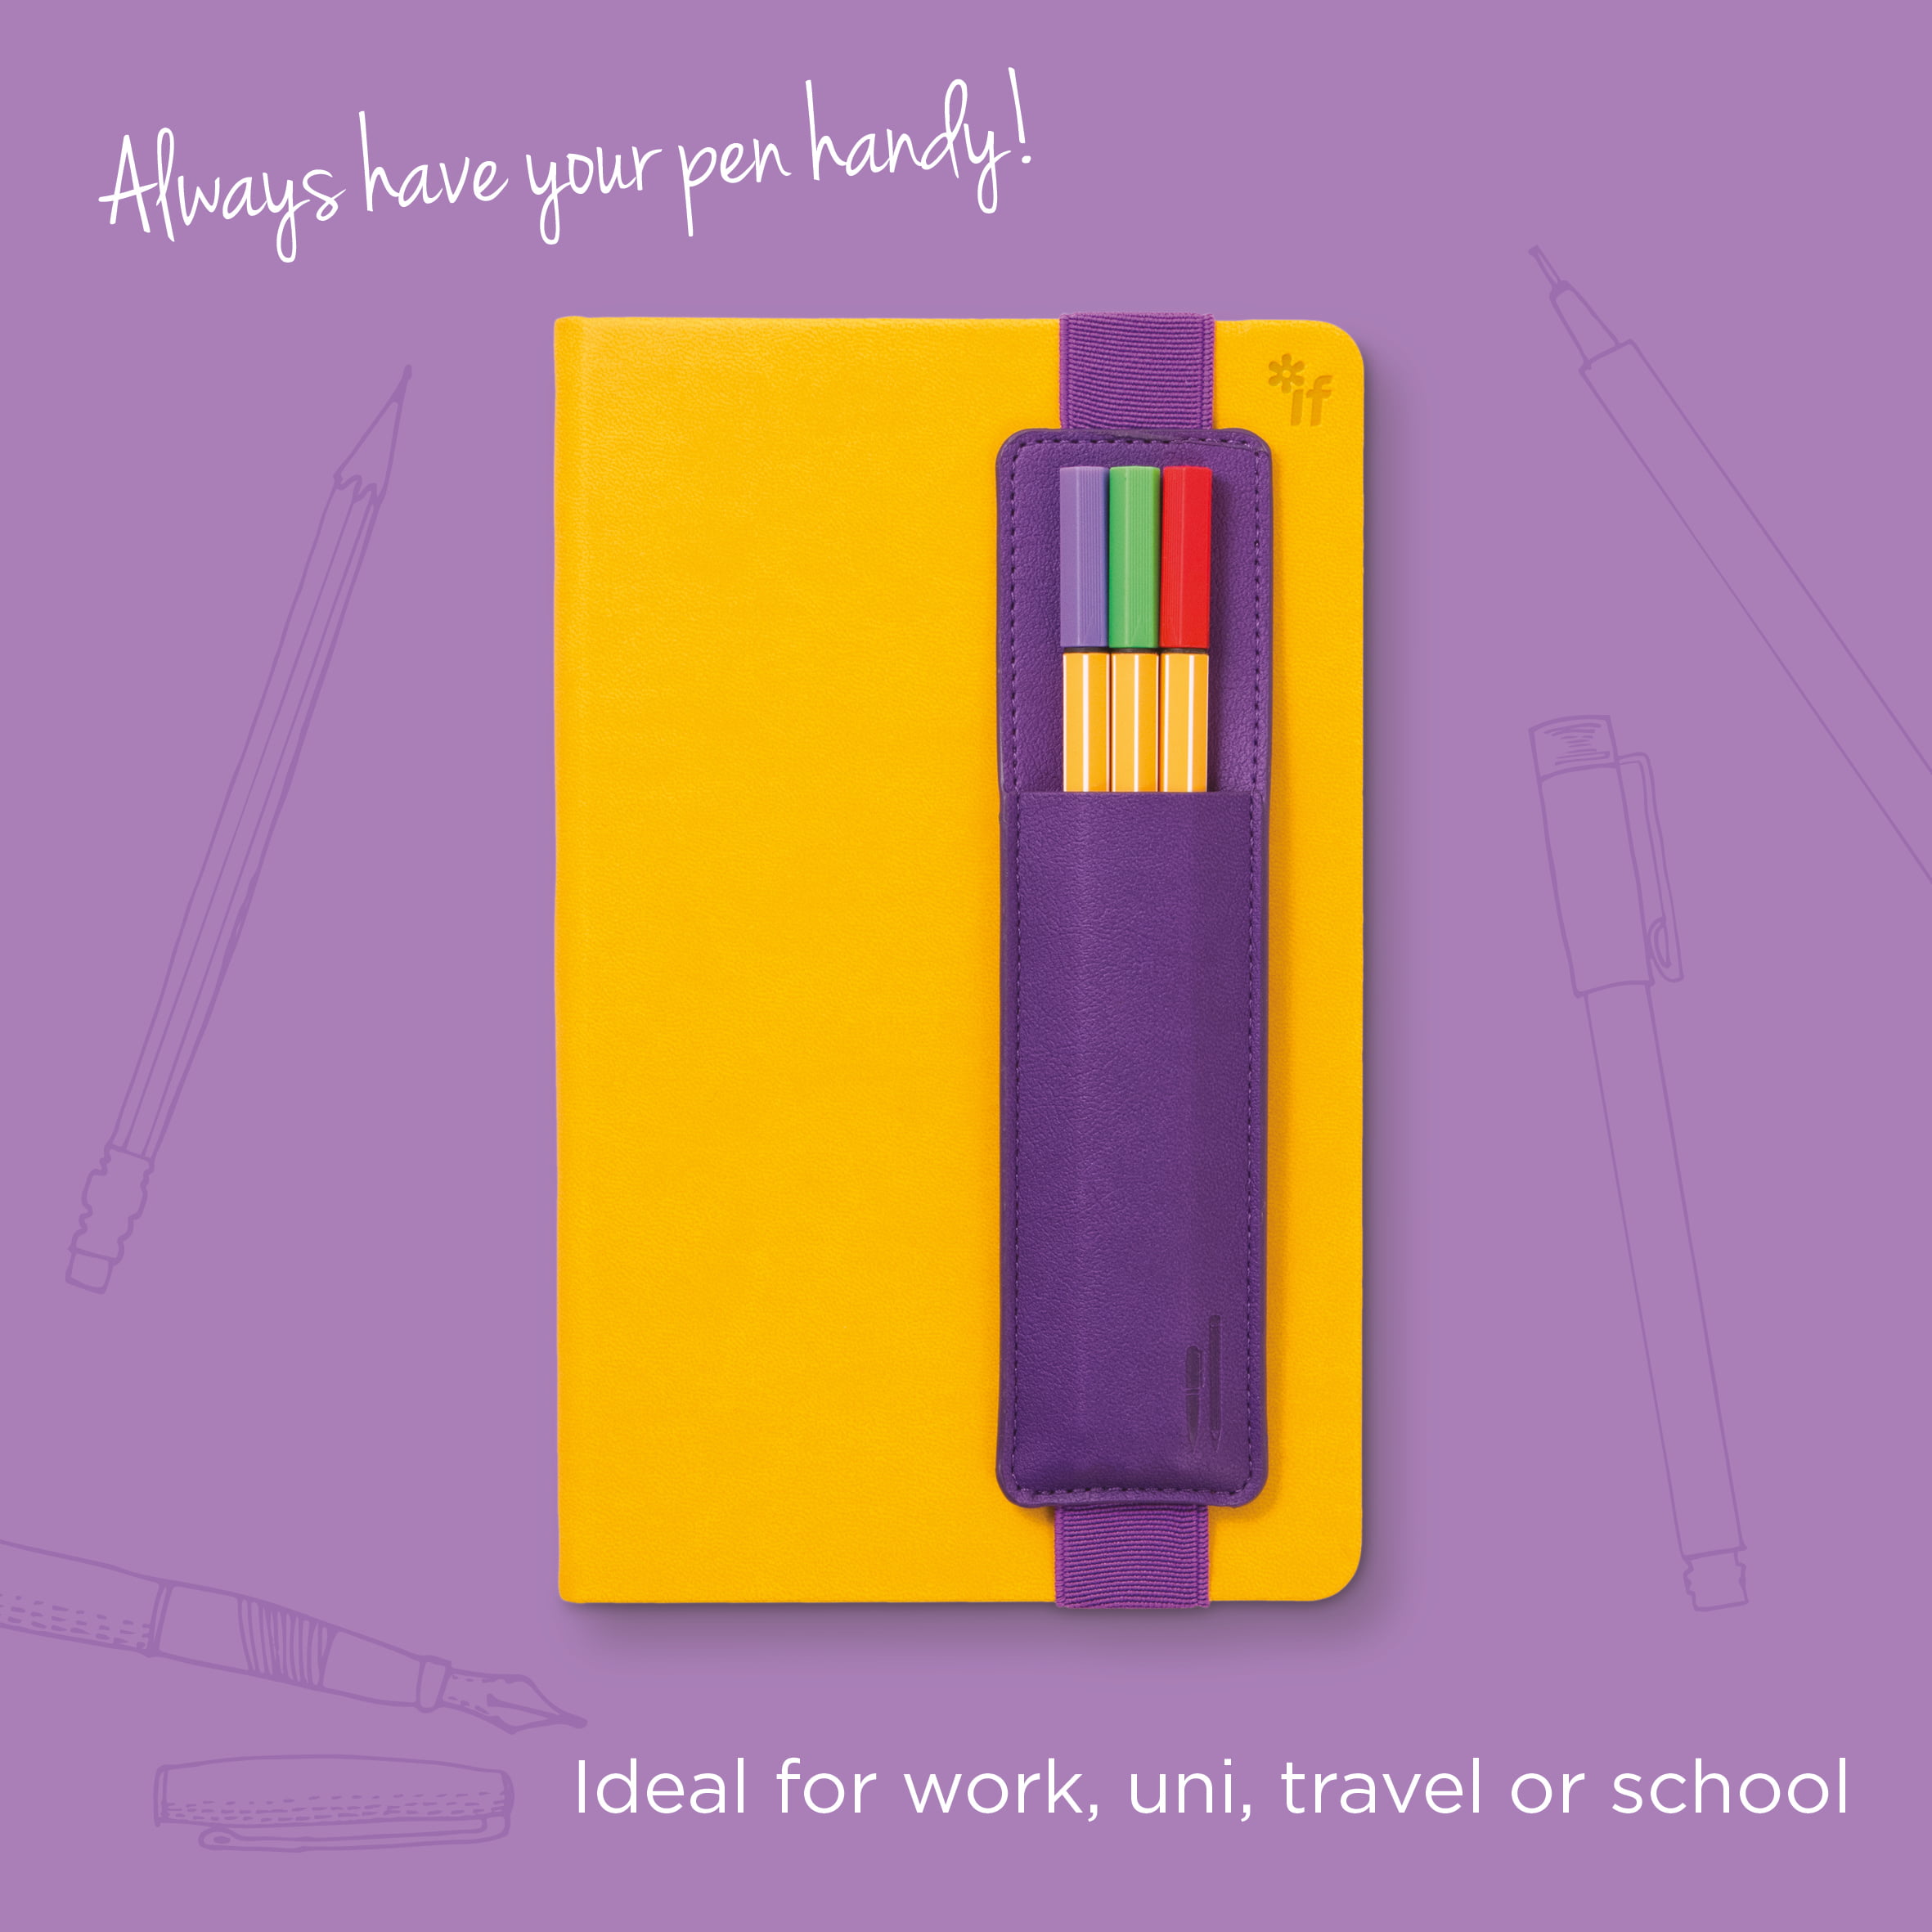 Bookaroo Pen Pouch - Purple (Other)